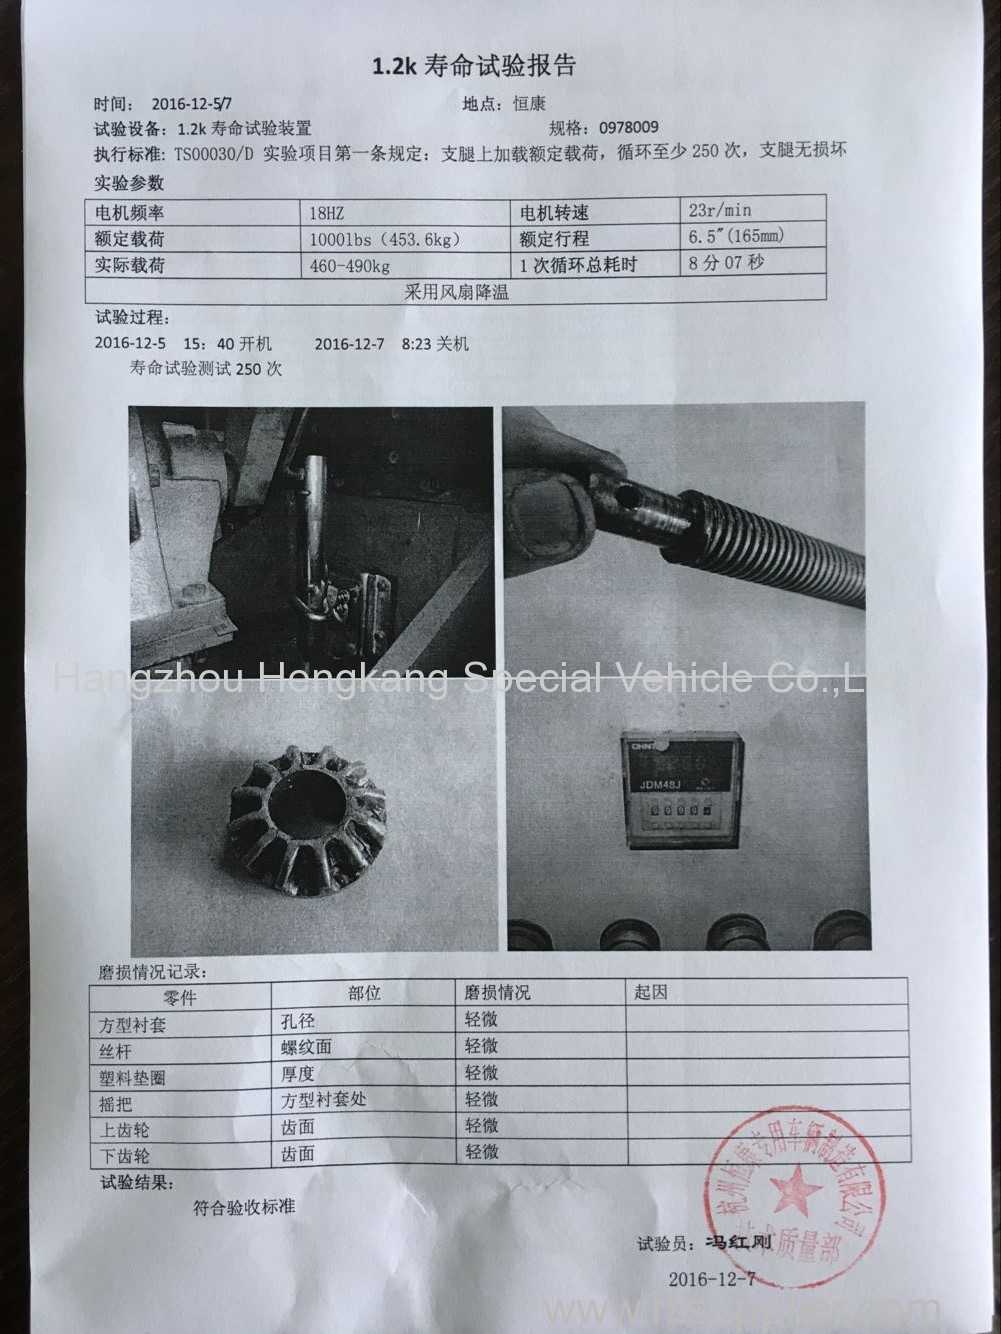 The test report of the 12k drop leg trailer jack